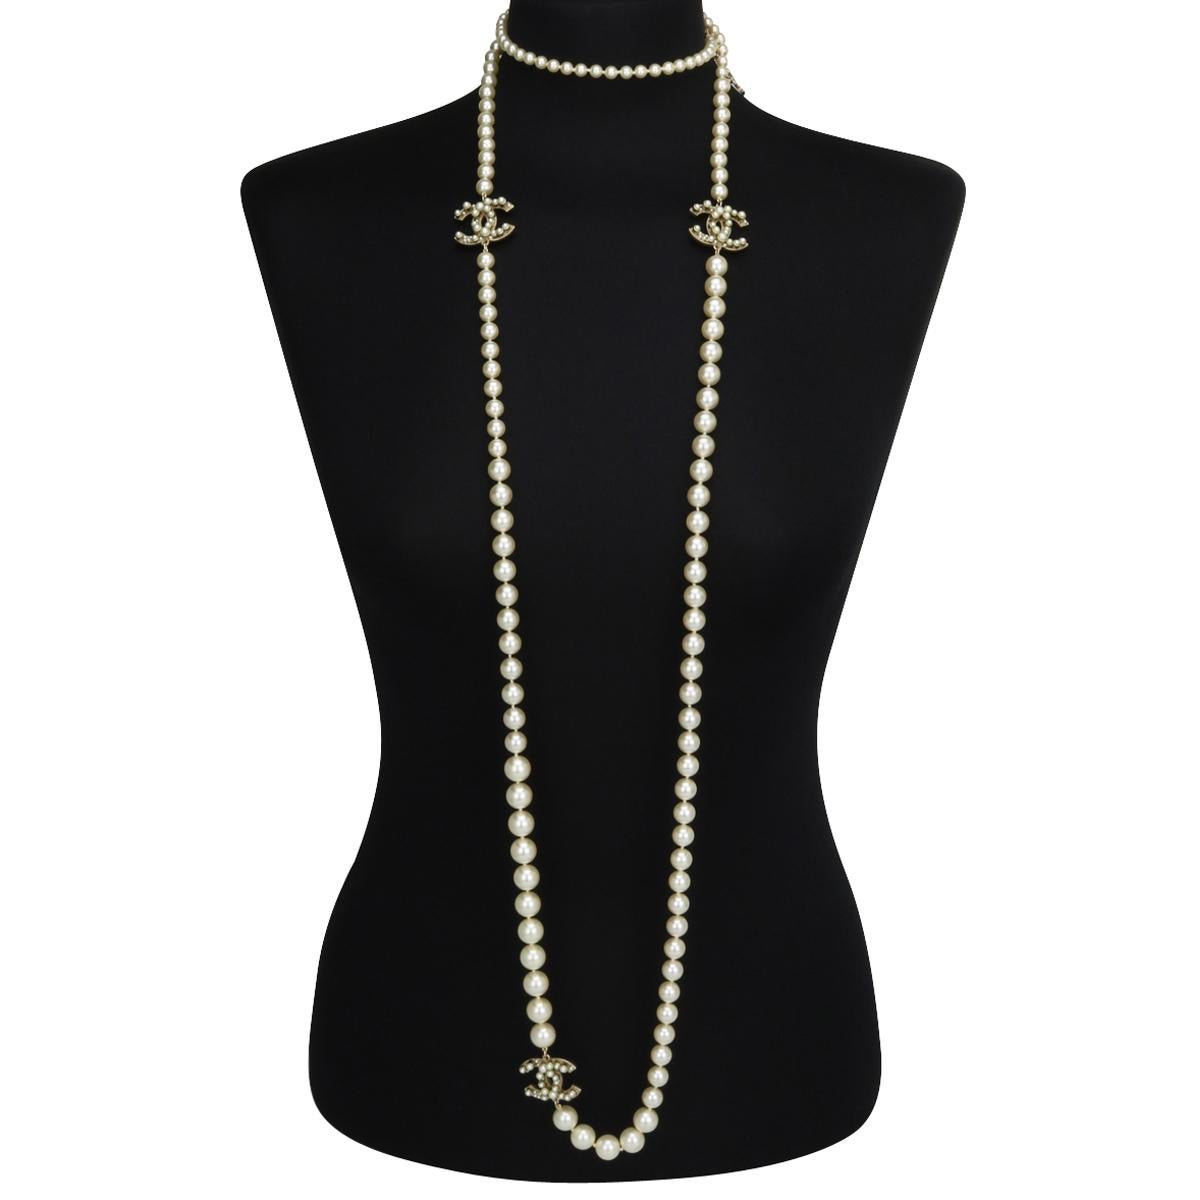 Authentic CHANEL CC Faux Pearl Gold Long Necklace 2014 (A14 S).

This stunning long necklace is in immaculate condition.

It is made of exquisite various-sized baroque pearl beads, with large interlocking CCs pendants with pearls on one side. It’s